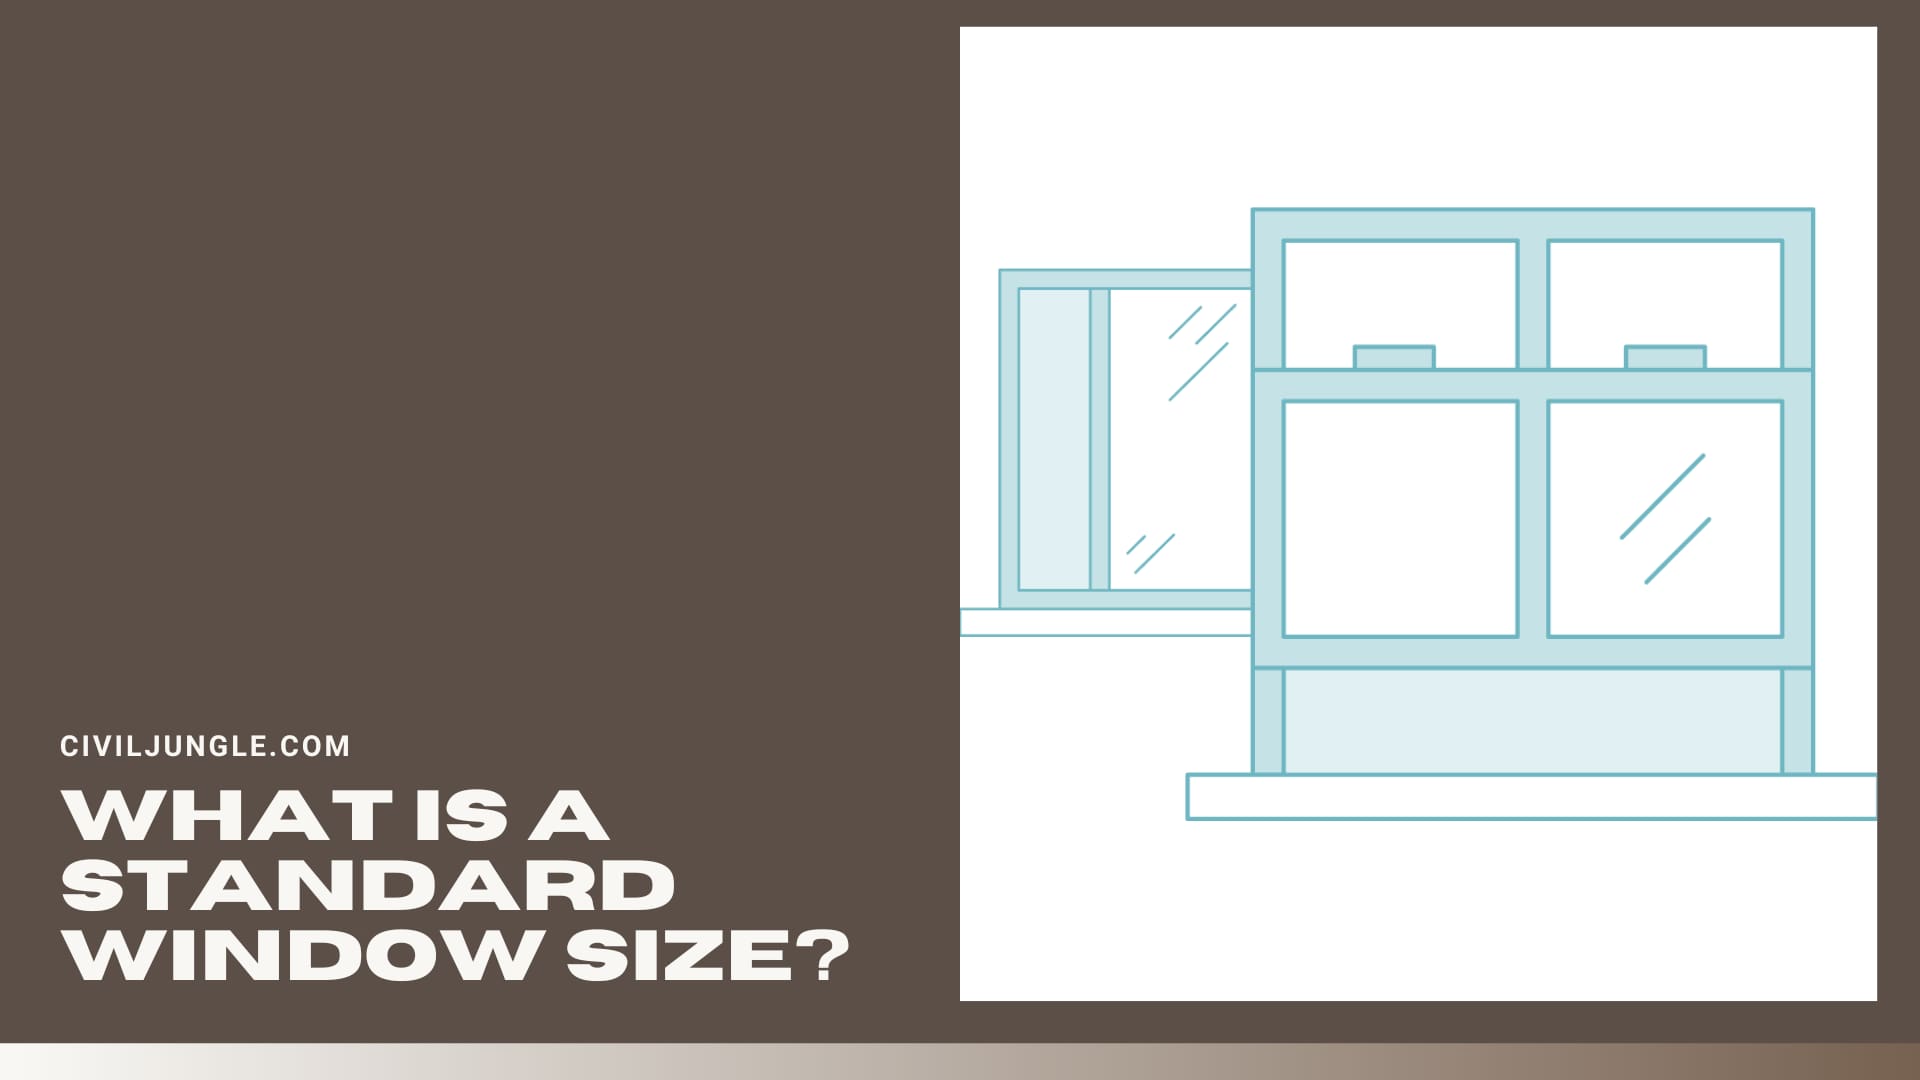 What Is a Standard Window Size?